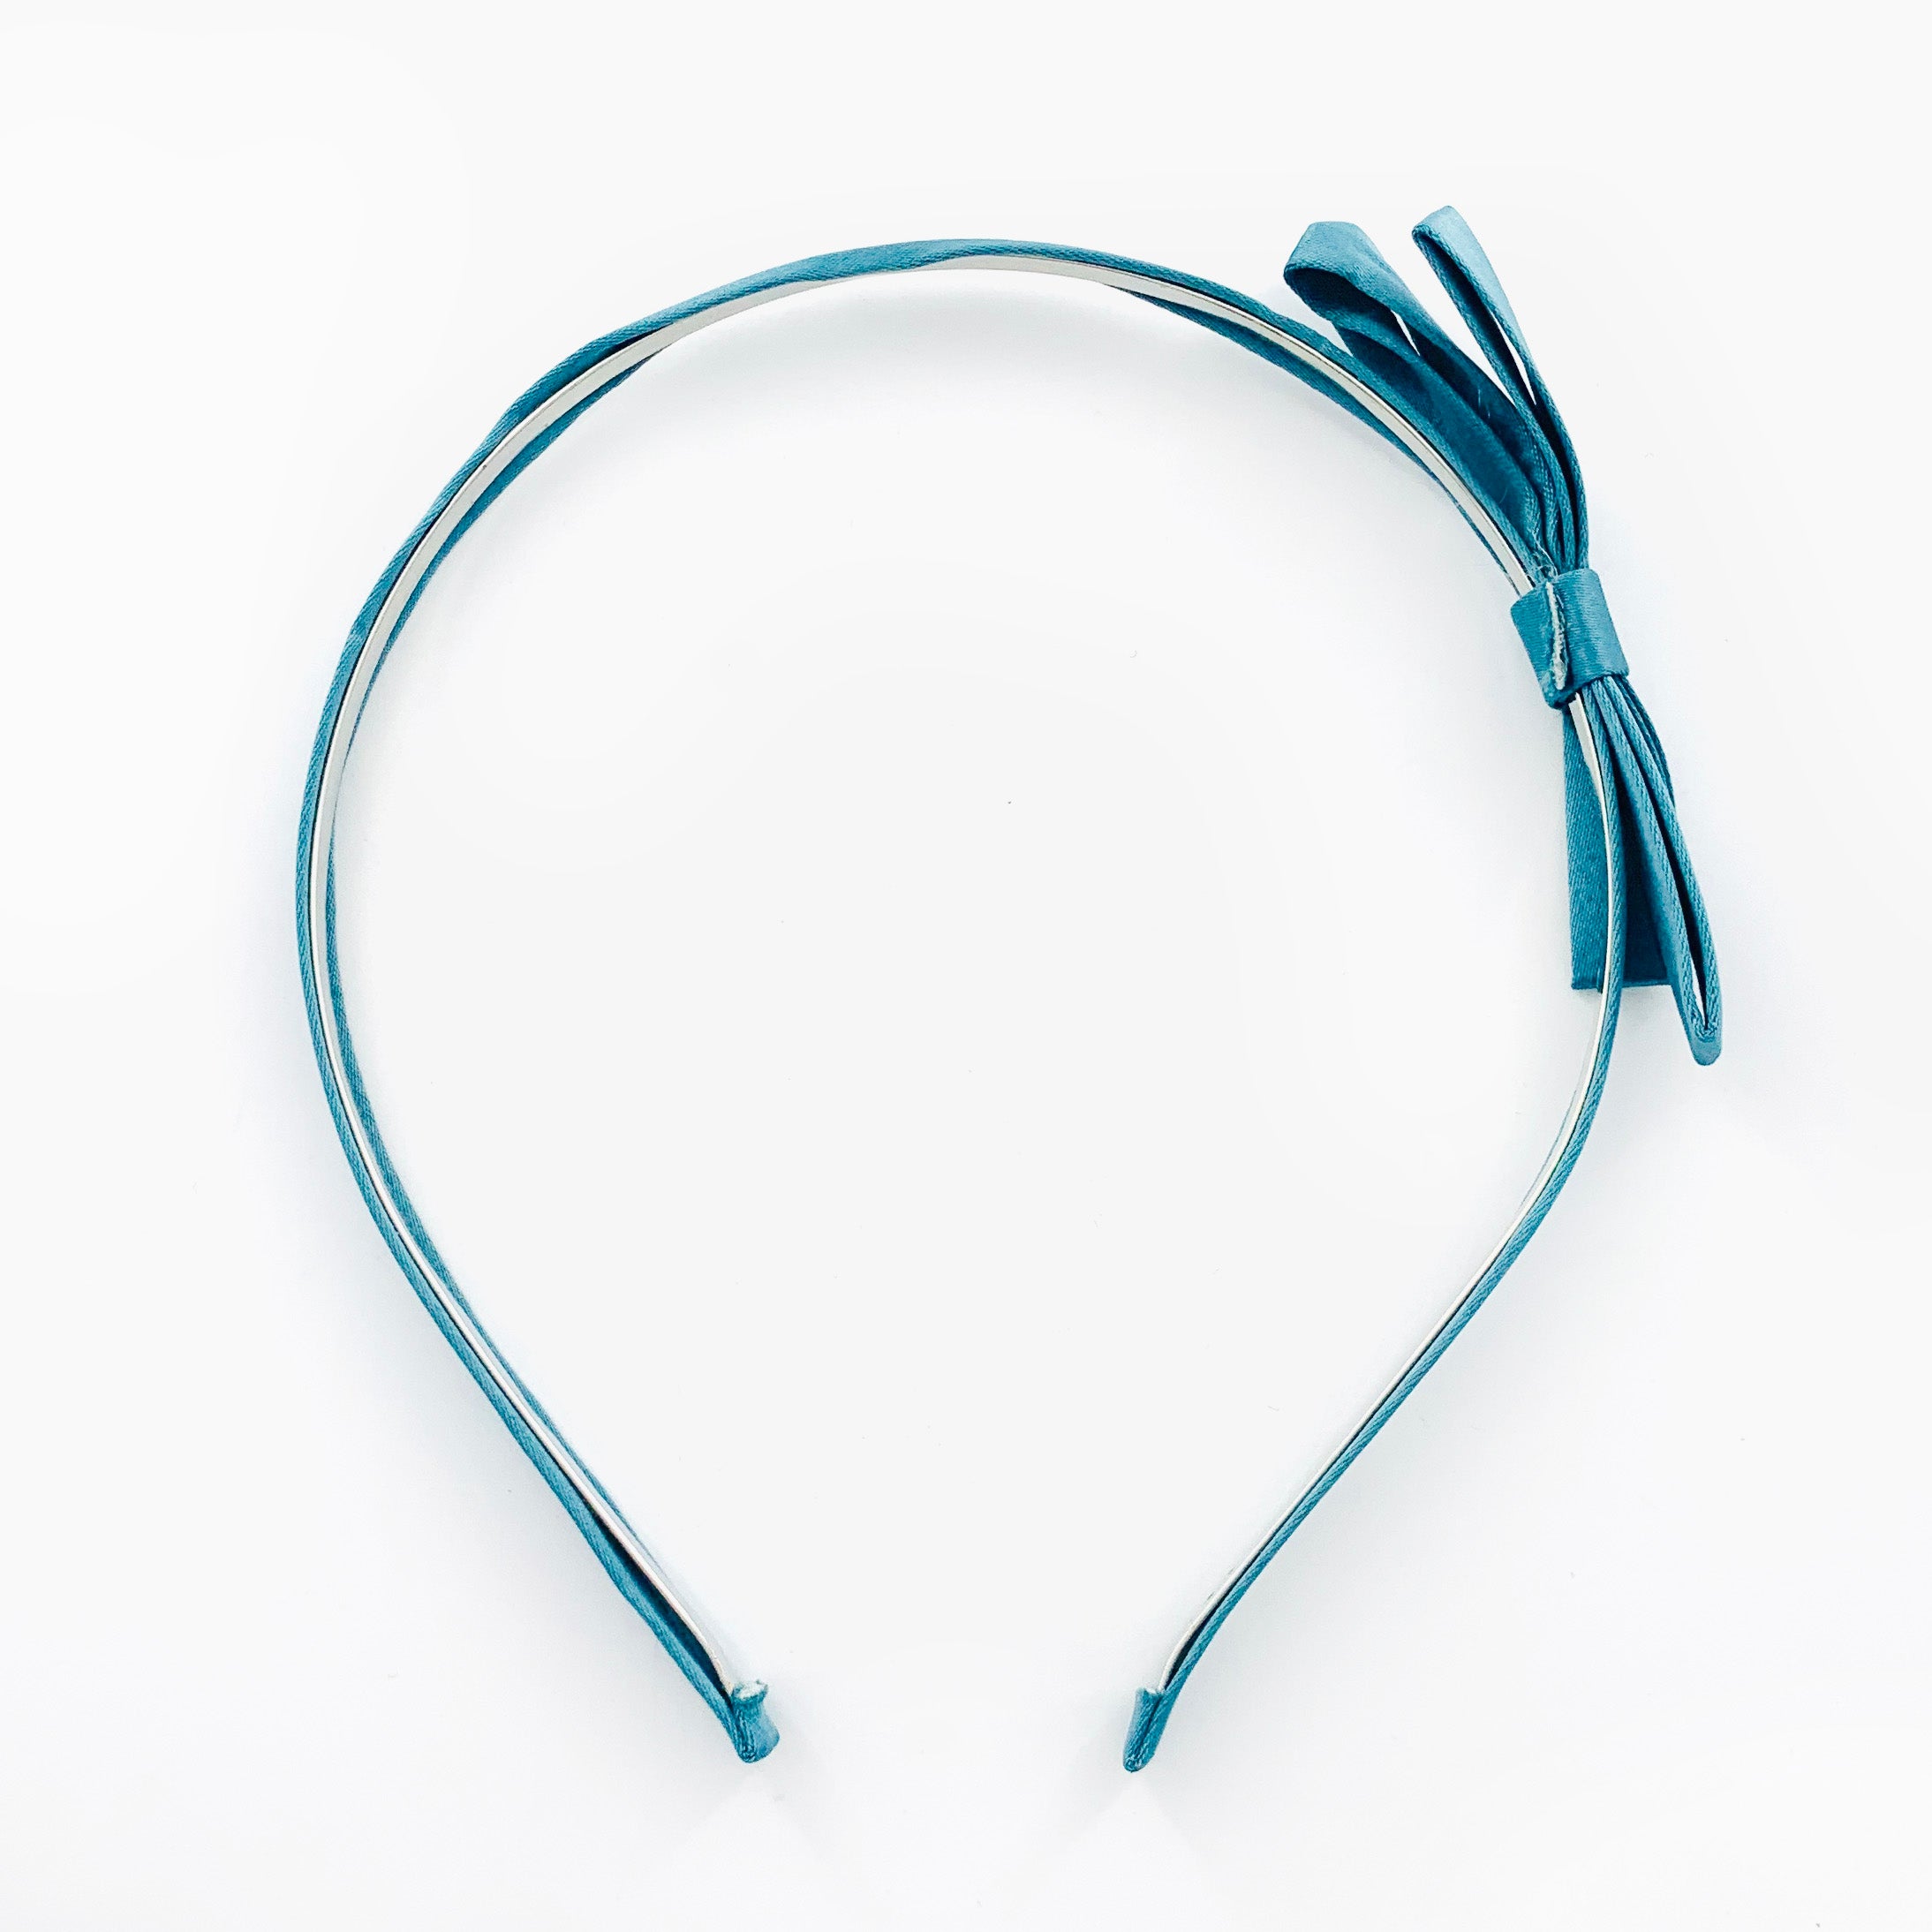 Thin teal fabric hairband with teal satin ribbon